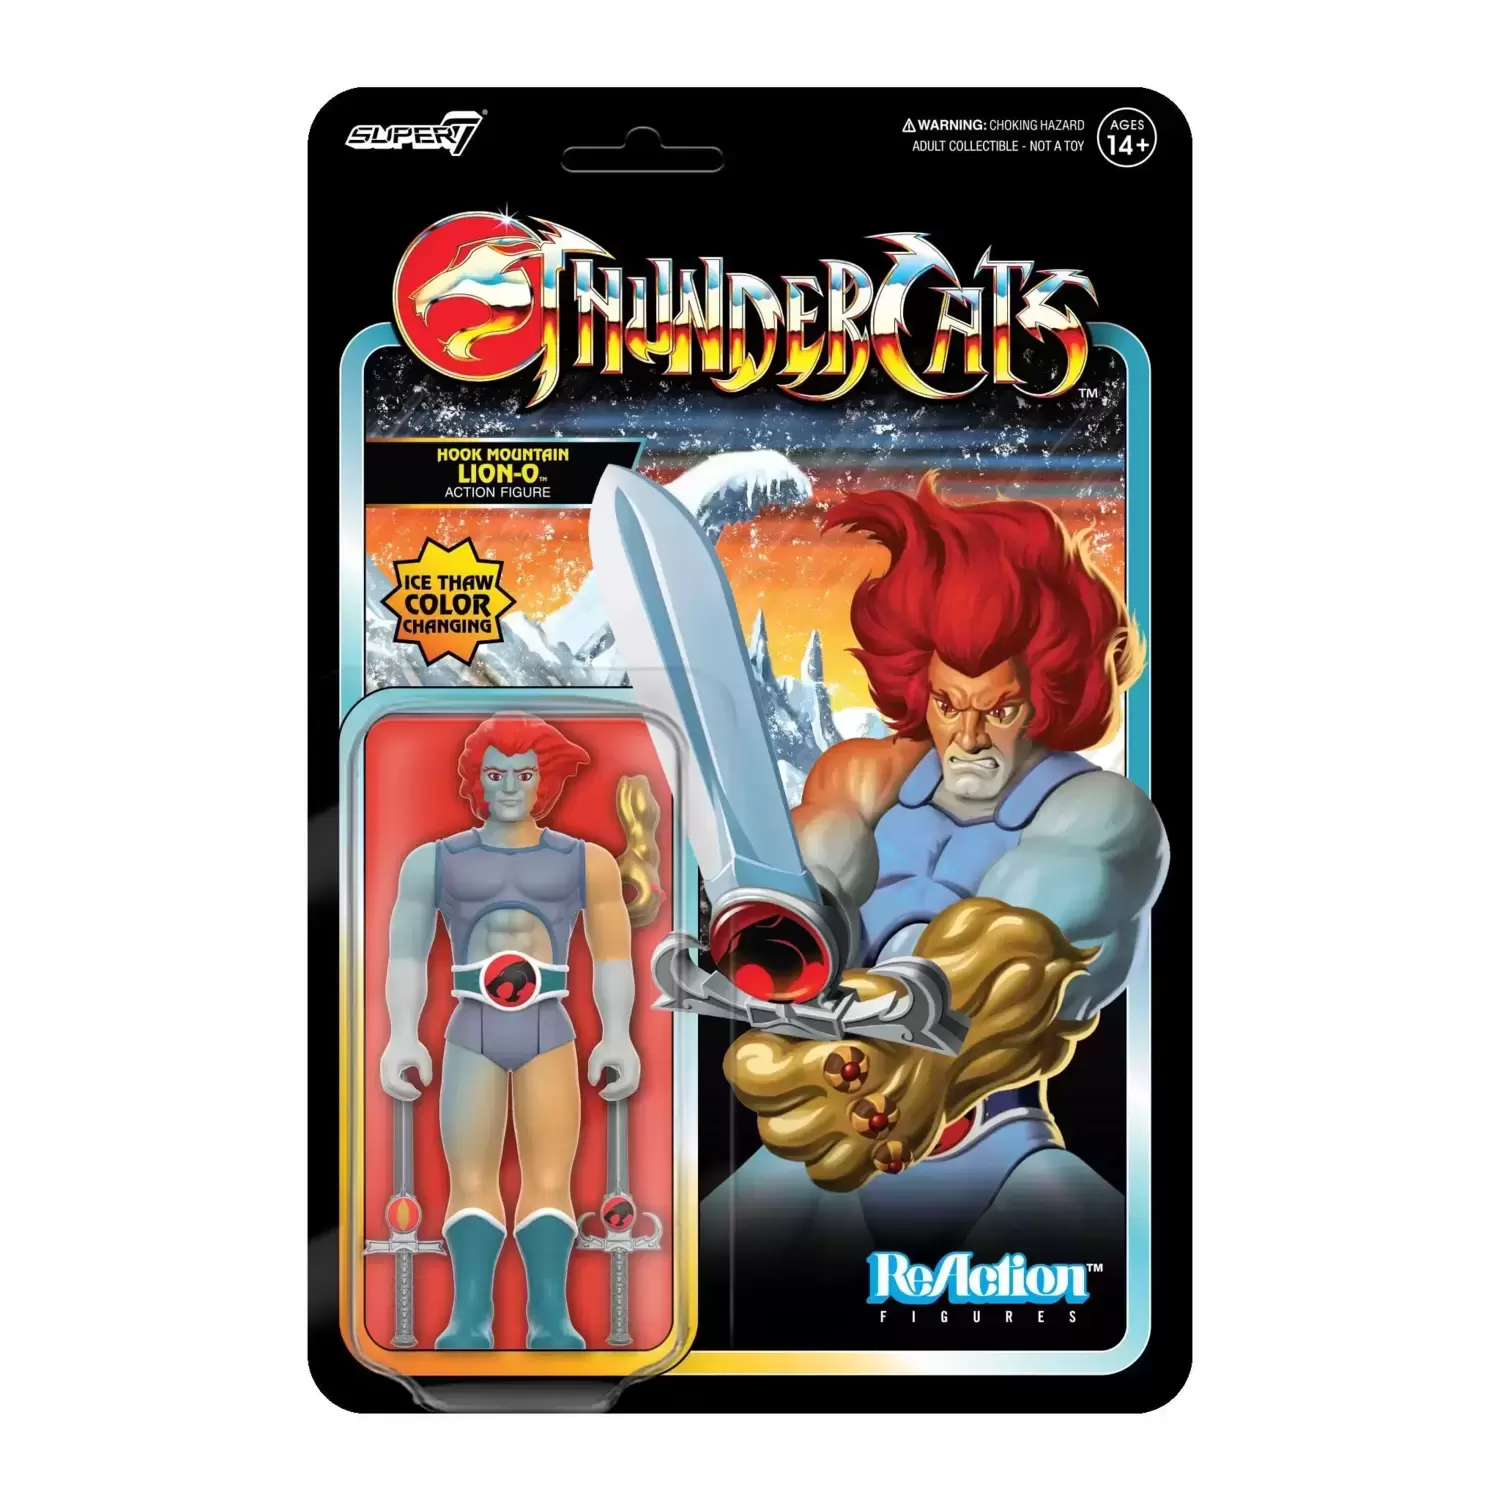 ReAction Figures - Thundercats - Hook Mountain Lion-O (Ice Thaw Color Change)